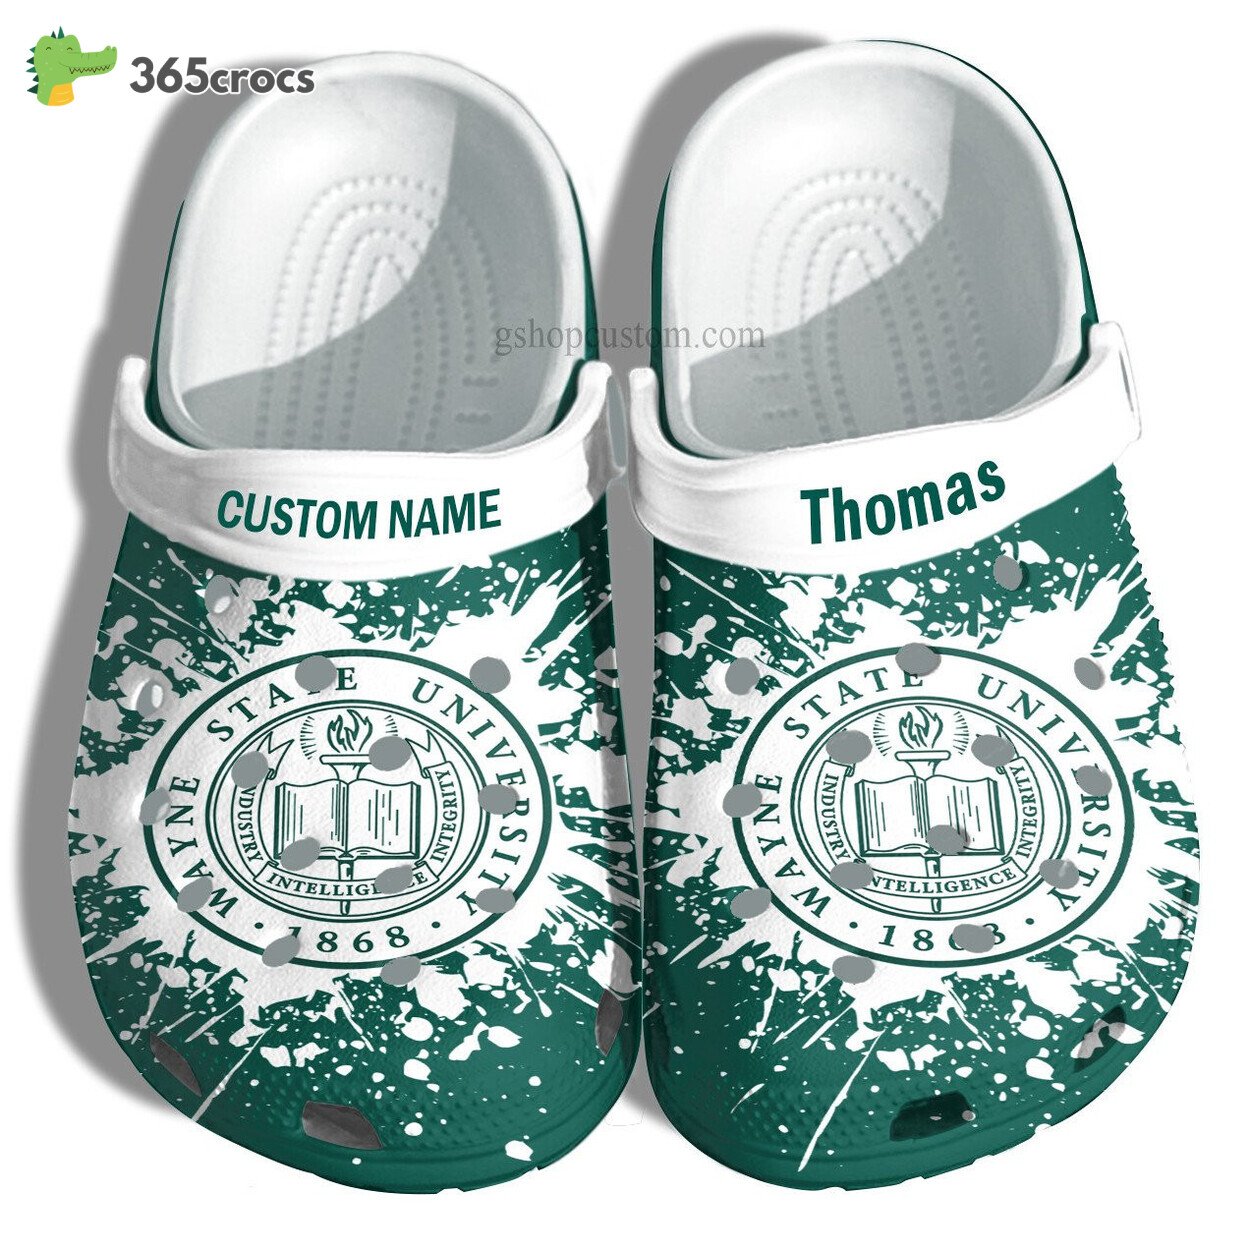 Wayne State University Graduation Gifts Croc Shoes Customize Admission Gift Shoes